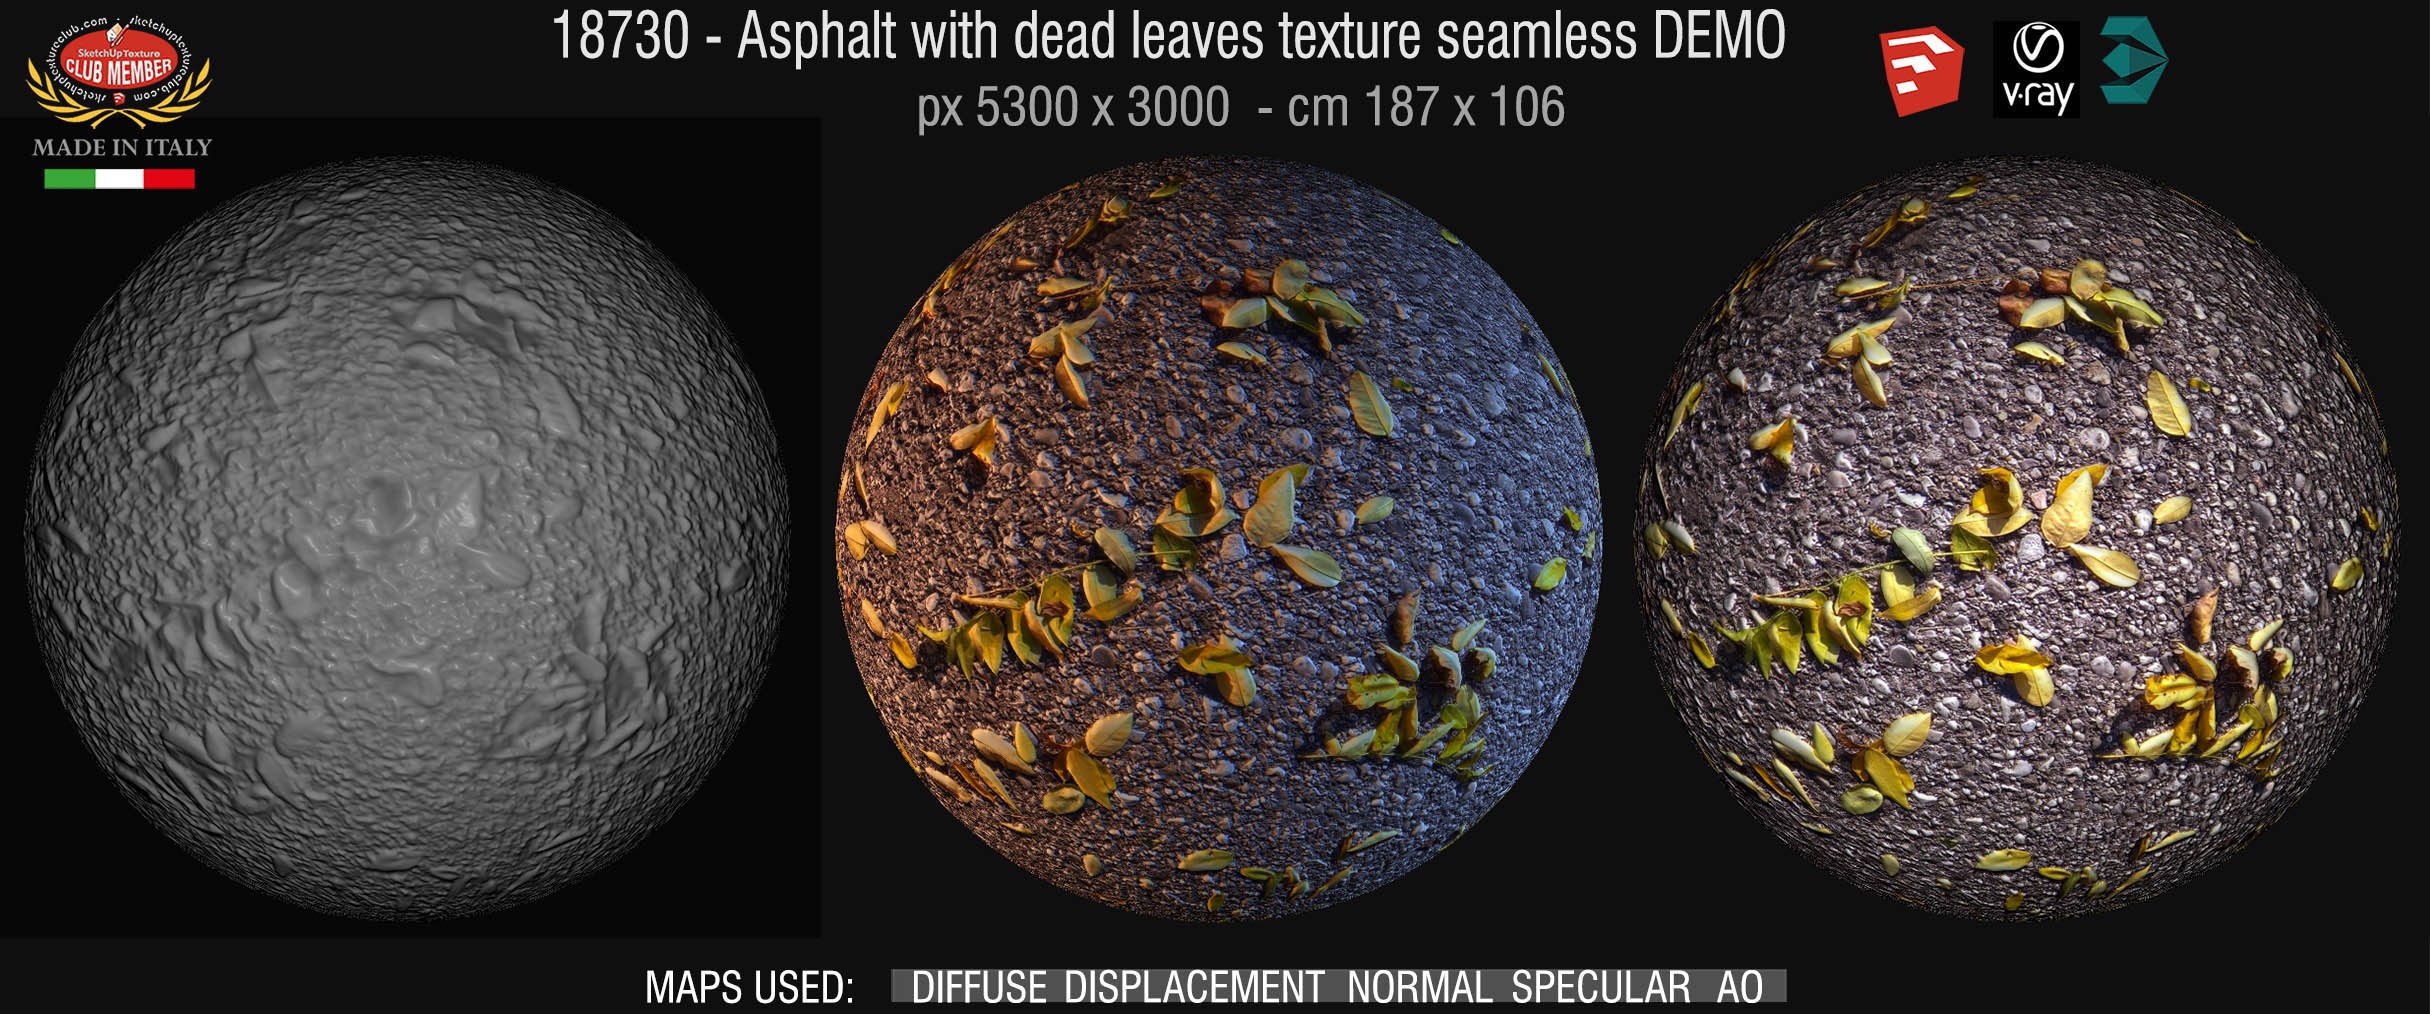 19370 Asphalt with dead leaves texture seamless + maps DEMO